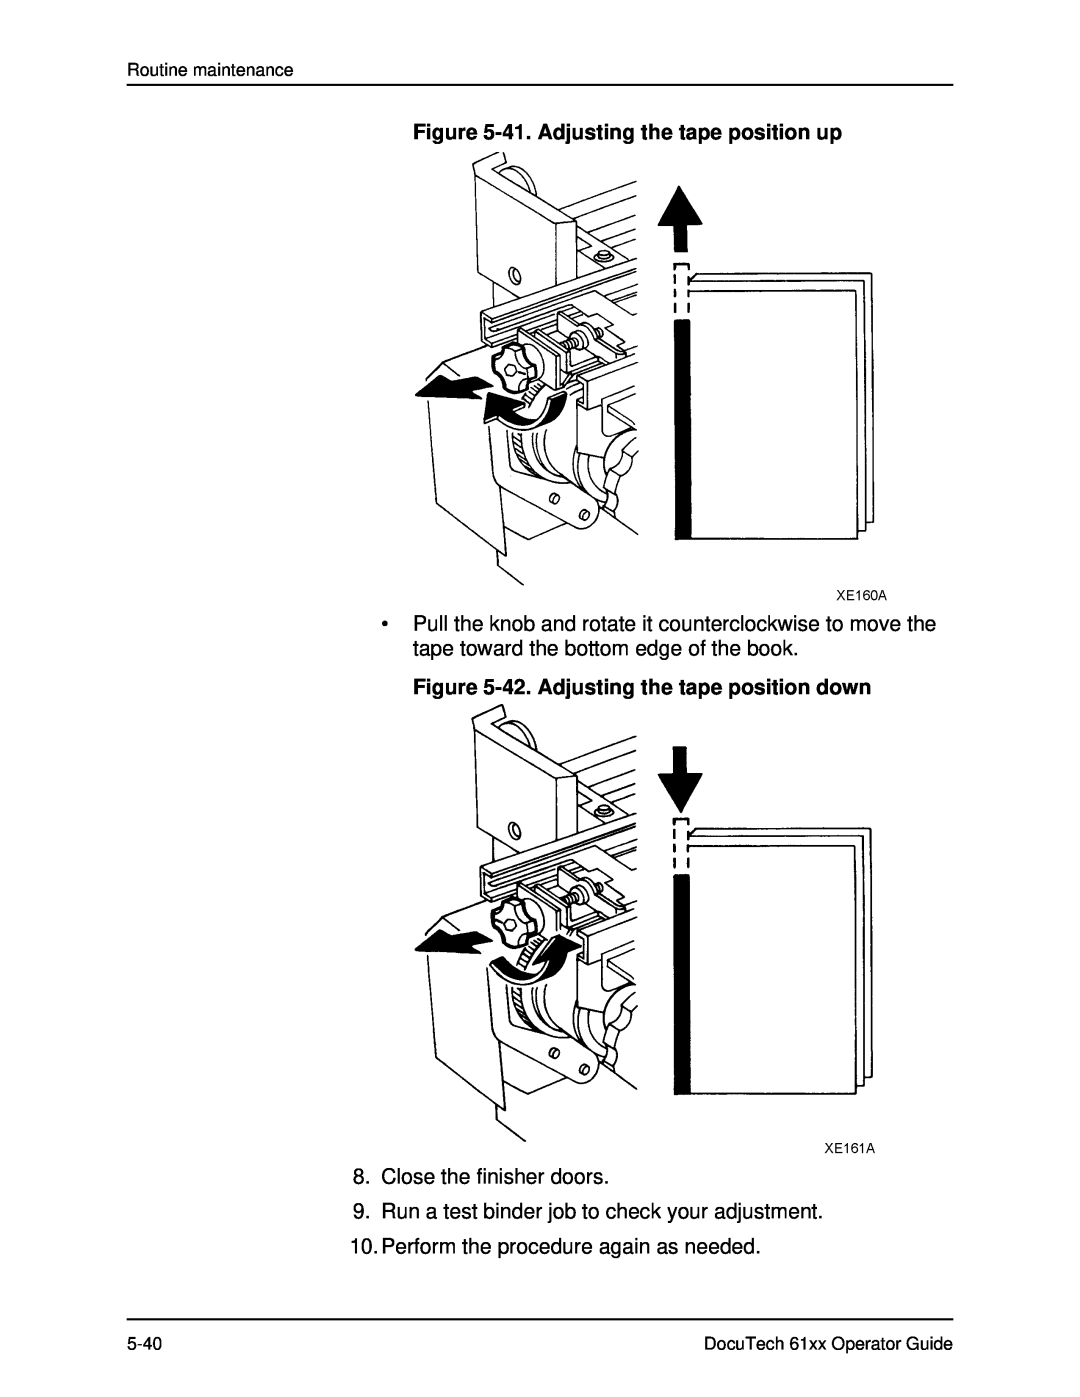 Xerox 61xx manual 41. Adjusting the tape position up, 42. Adjusting the tape position down, Close the finisher doors 